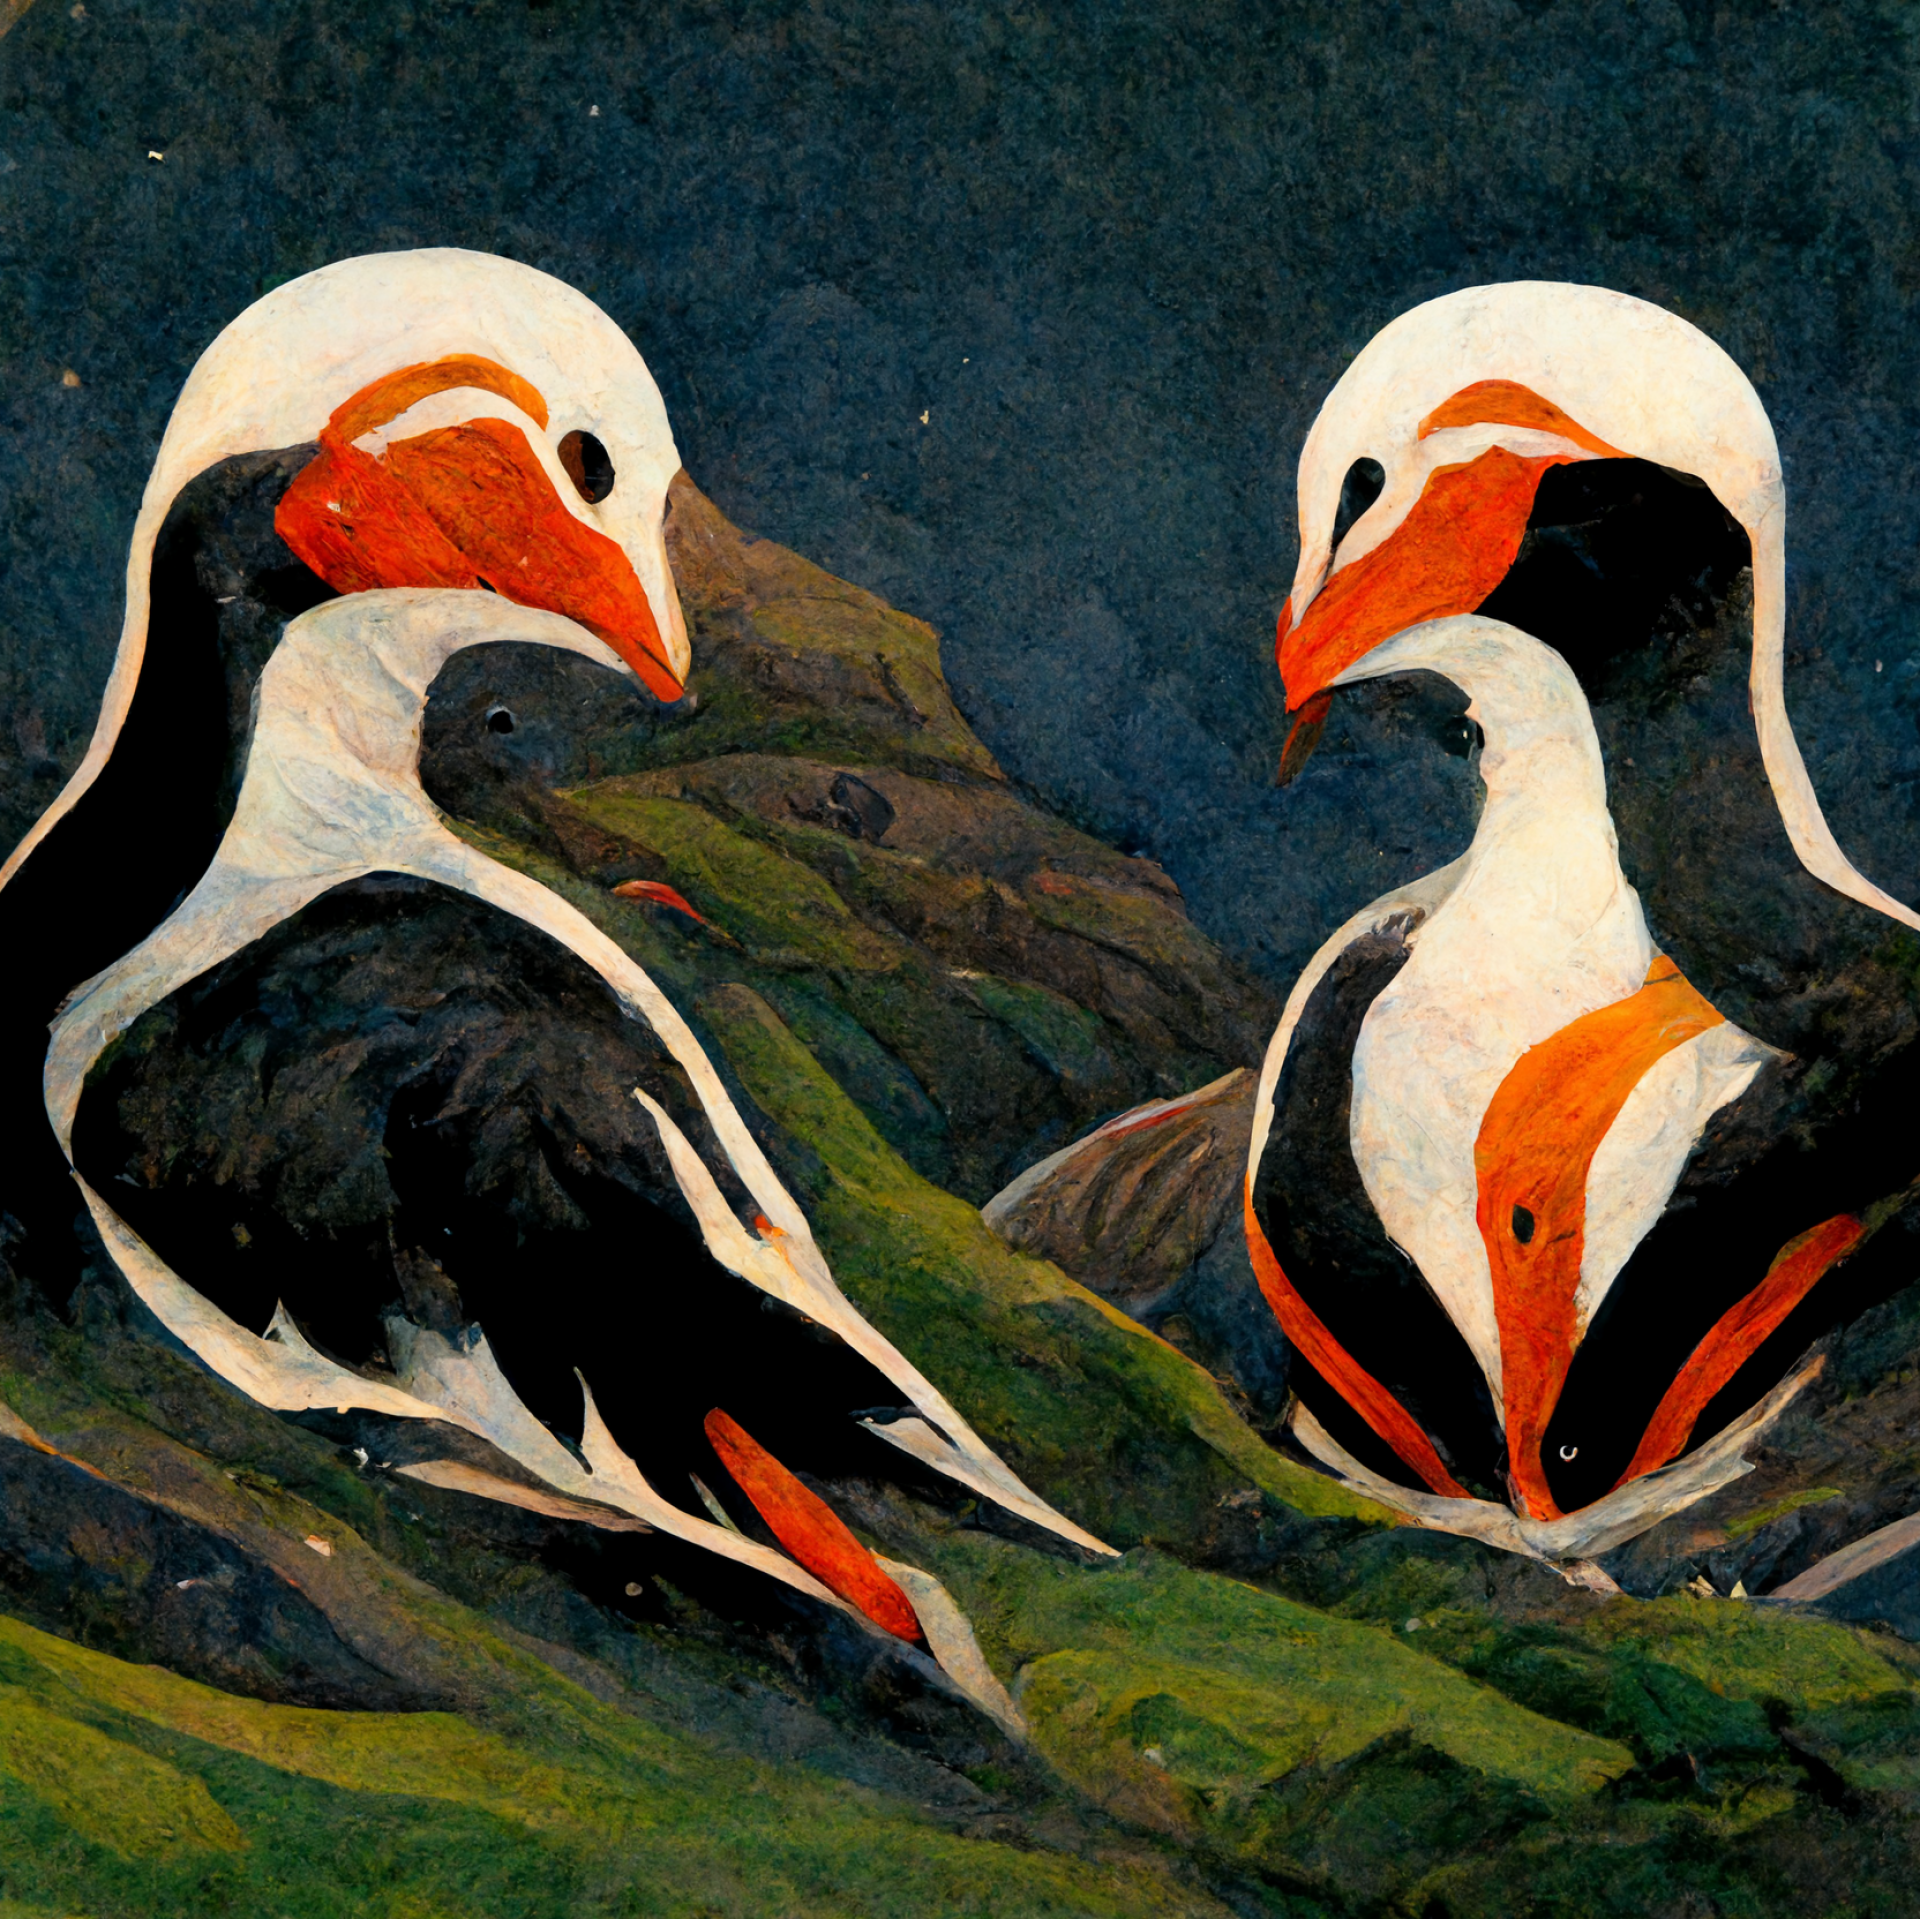 AI-generated image from Midjourney, the Faroe Islands inspired by Willumsen.